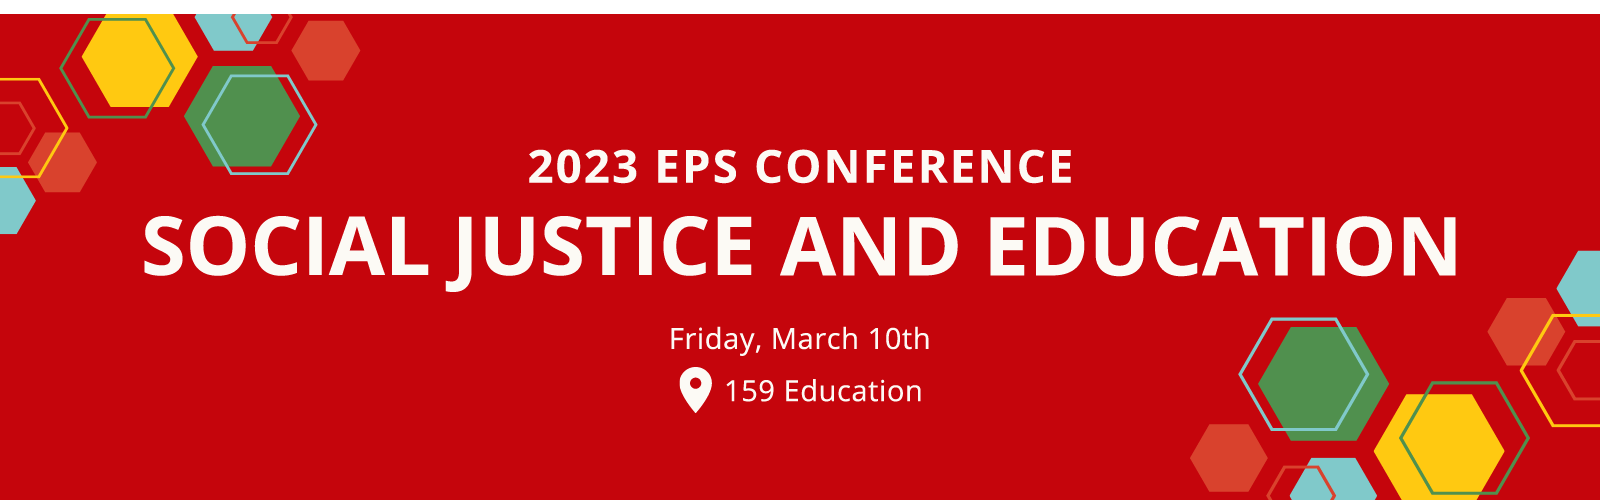 Red graphic with green, blue, and yellow hexagons with text saying 2023 EPS Conference, Social Justice and Education.